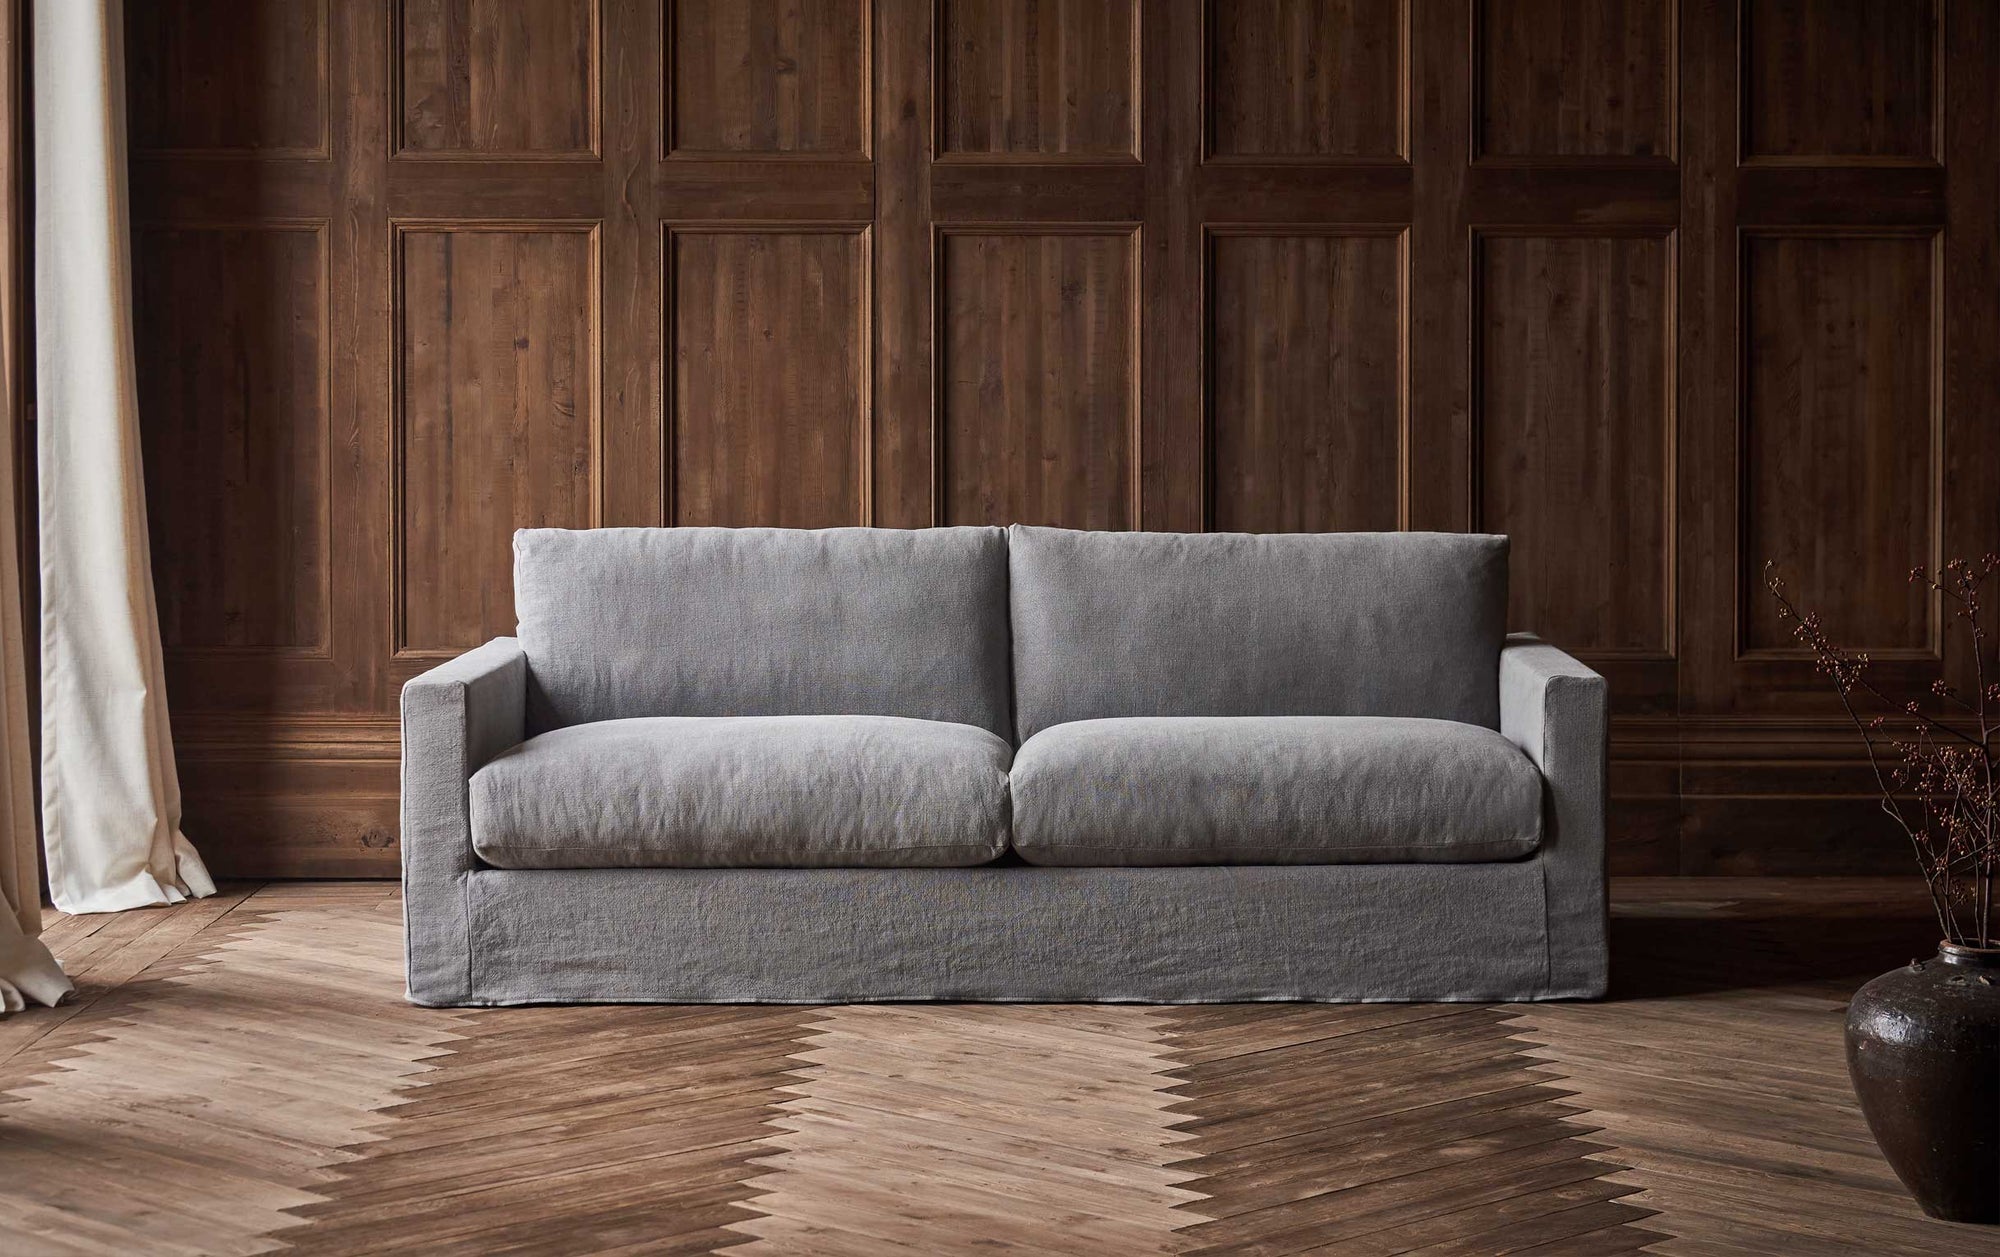 Devyn 84" Sofa in Ink Cap, a medium cool grey Light Weight Linen, placed in a naturally lit, wood-panelled room